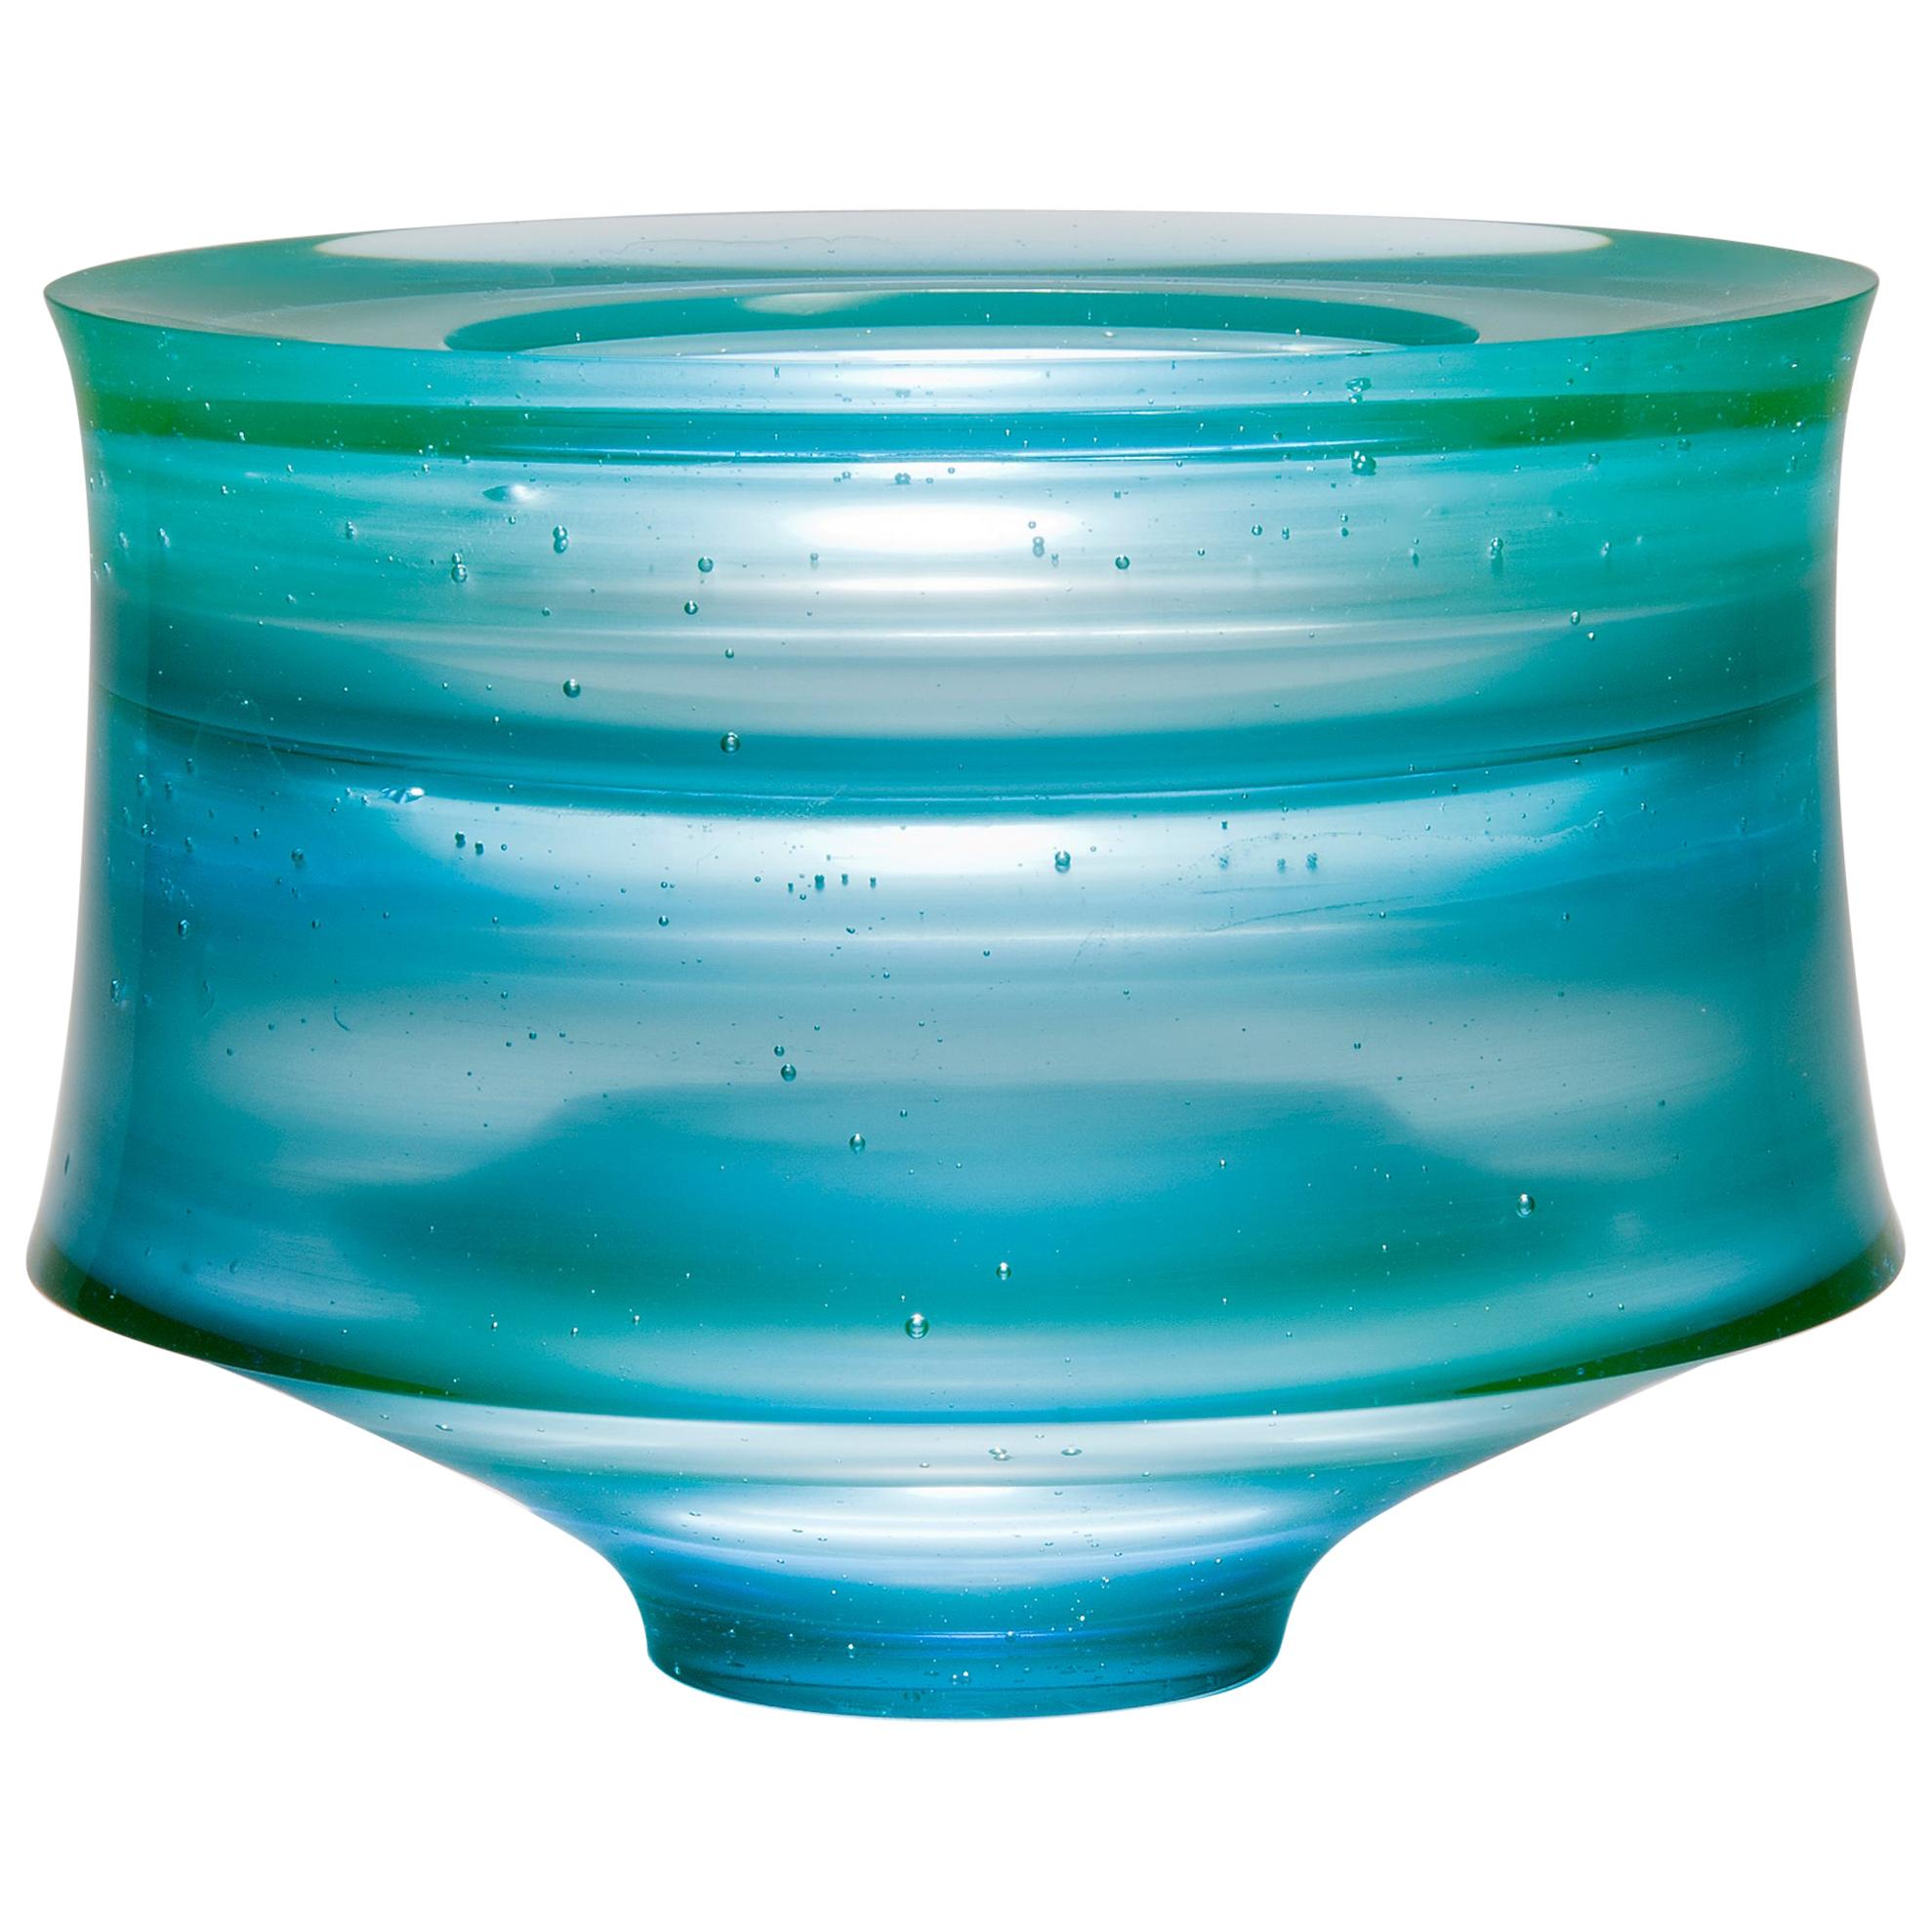 Corymb, a Unique Aqua/Turquoise Glass Art Work and Centrepiece by Paul Stopler